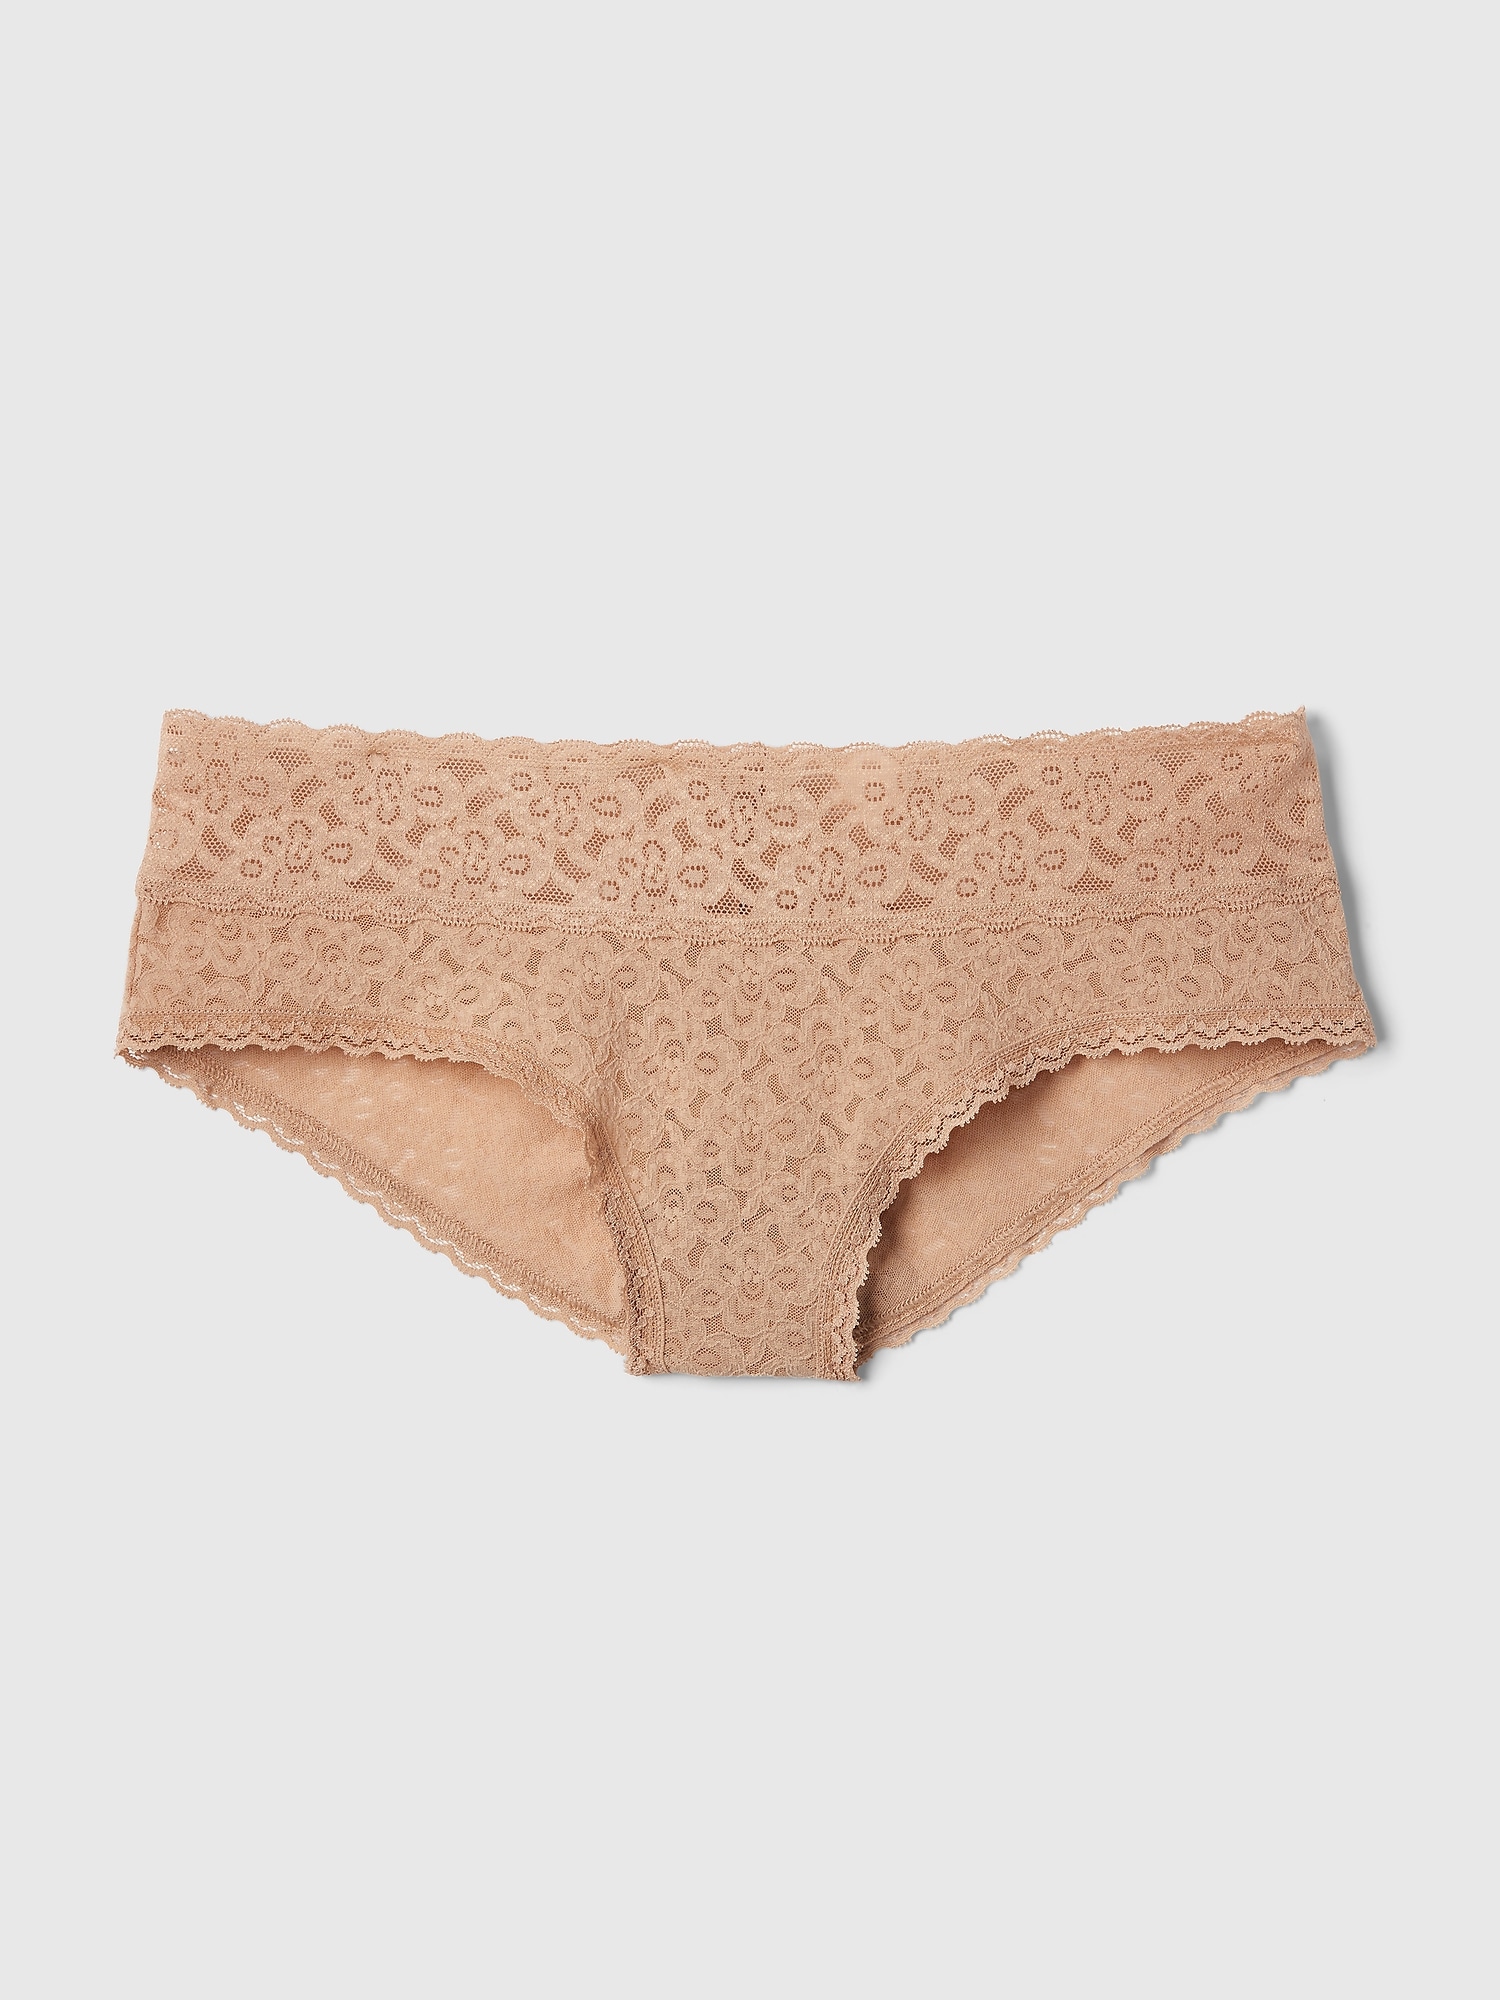 Ardene Lace Back Invisible Cheeky in Light Pink, Size